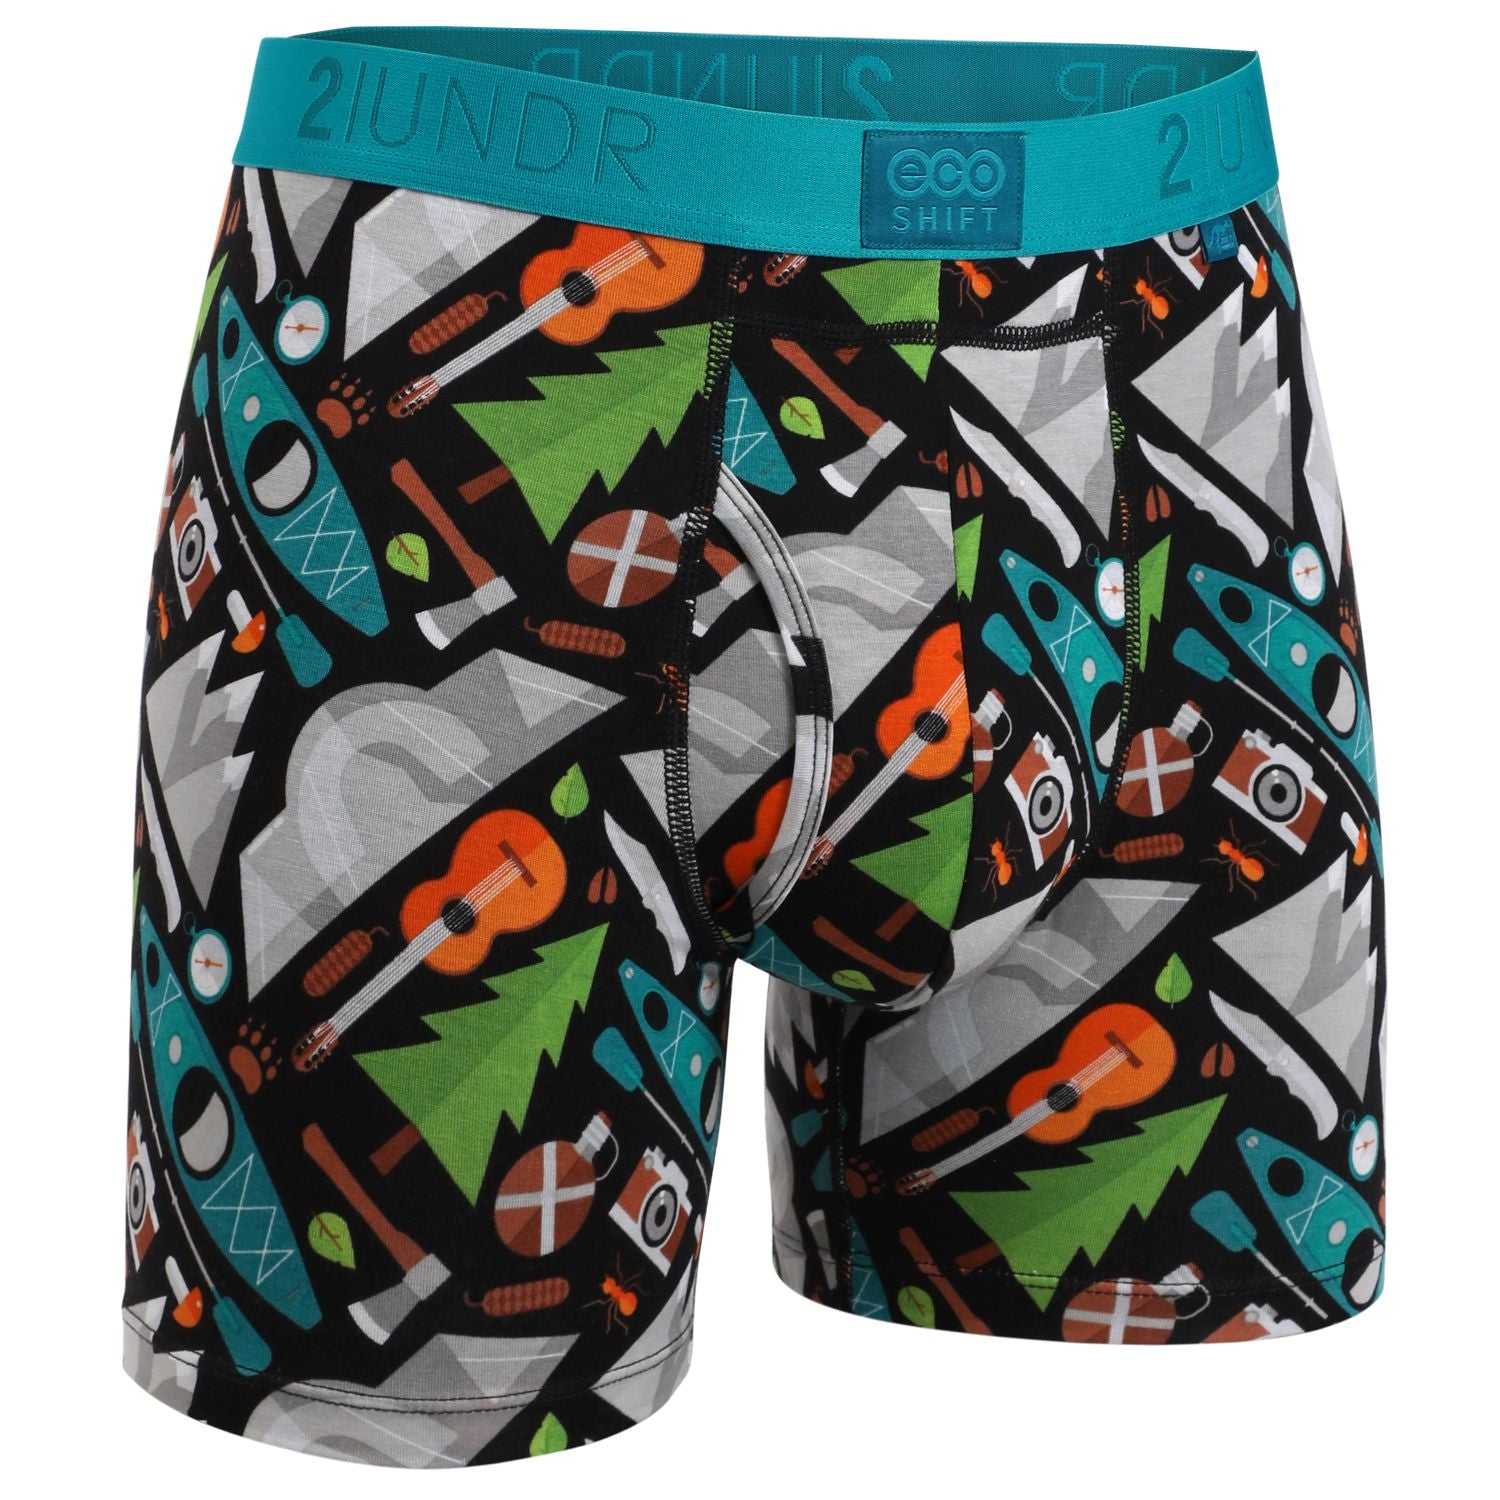 2Undr Eco Shift Boxer Brief - Glampers